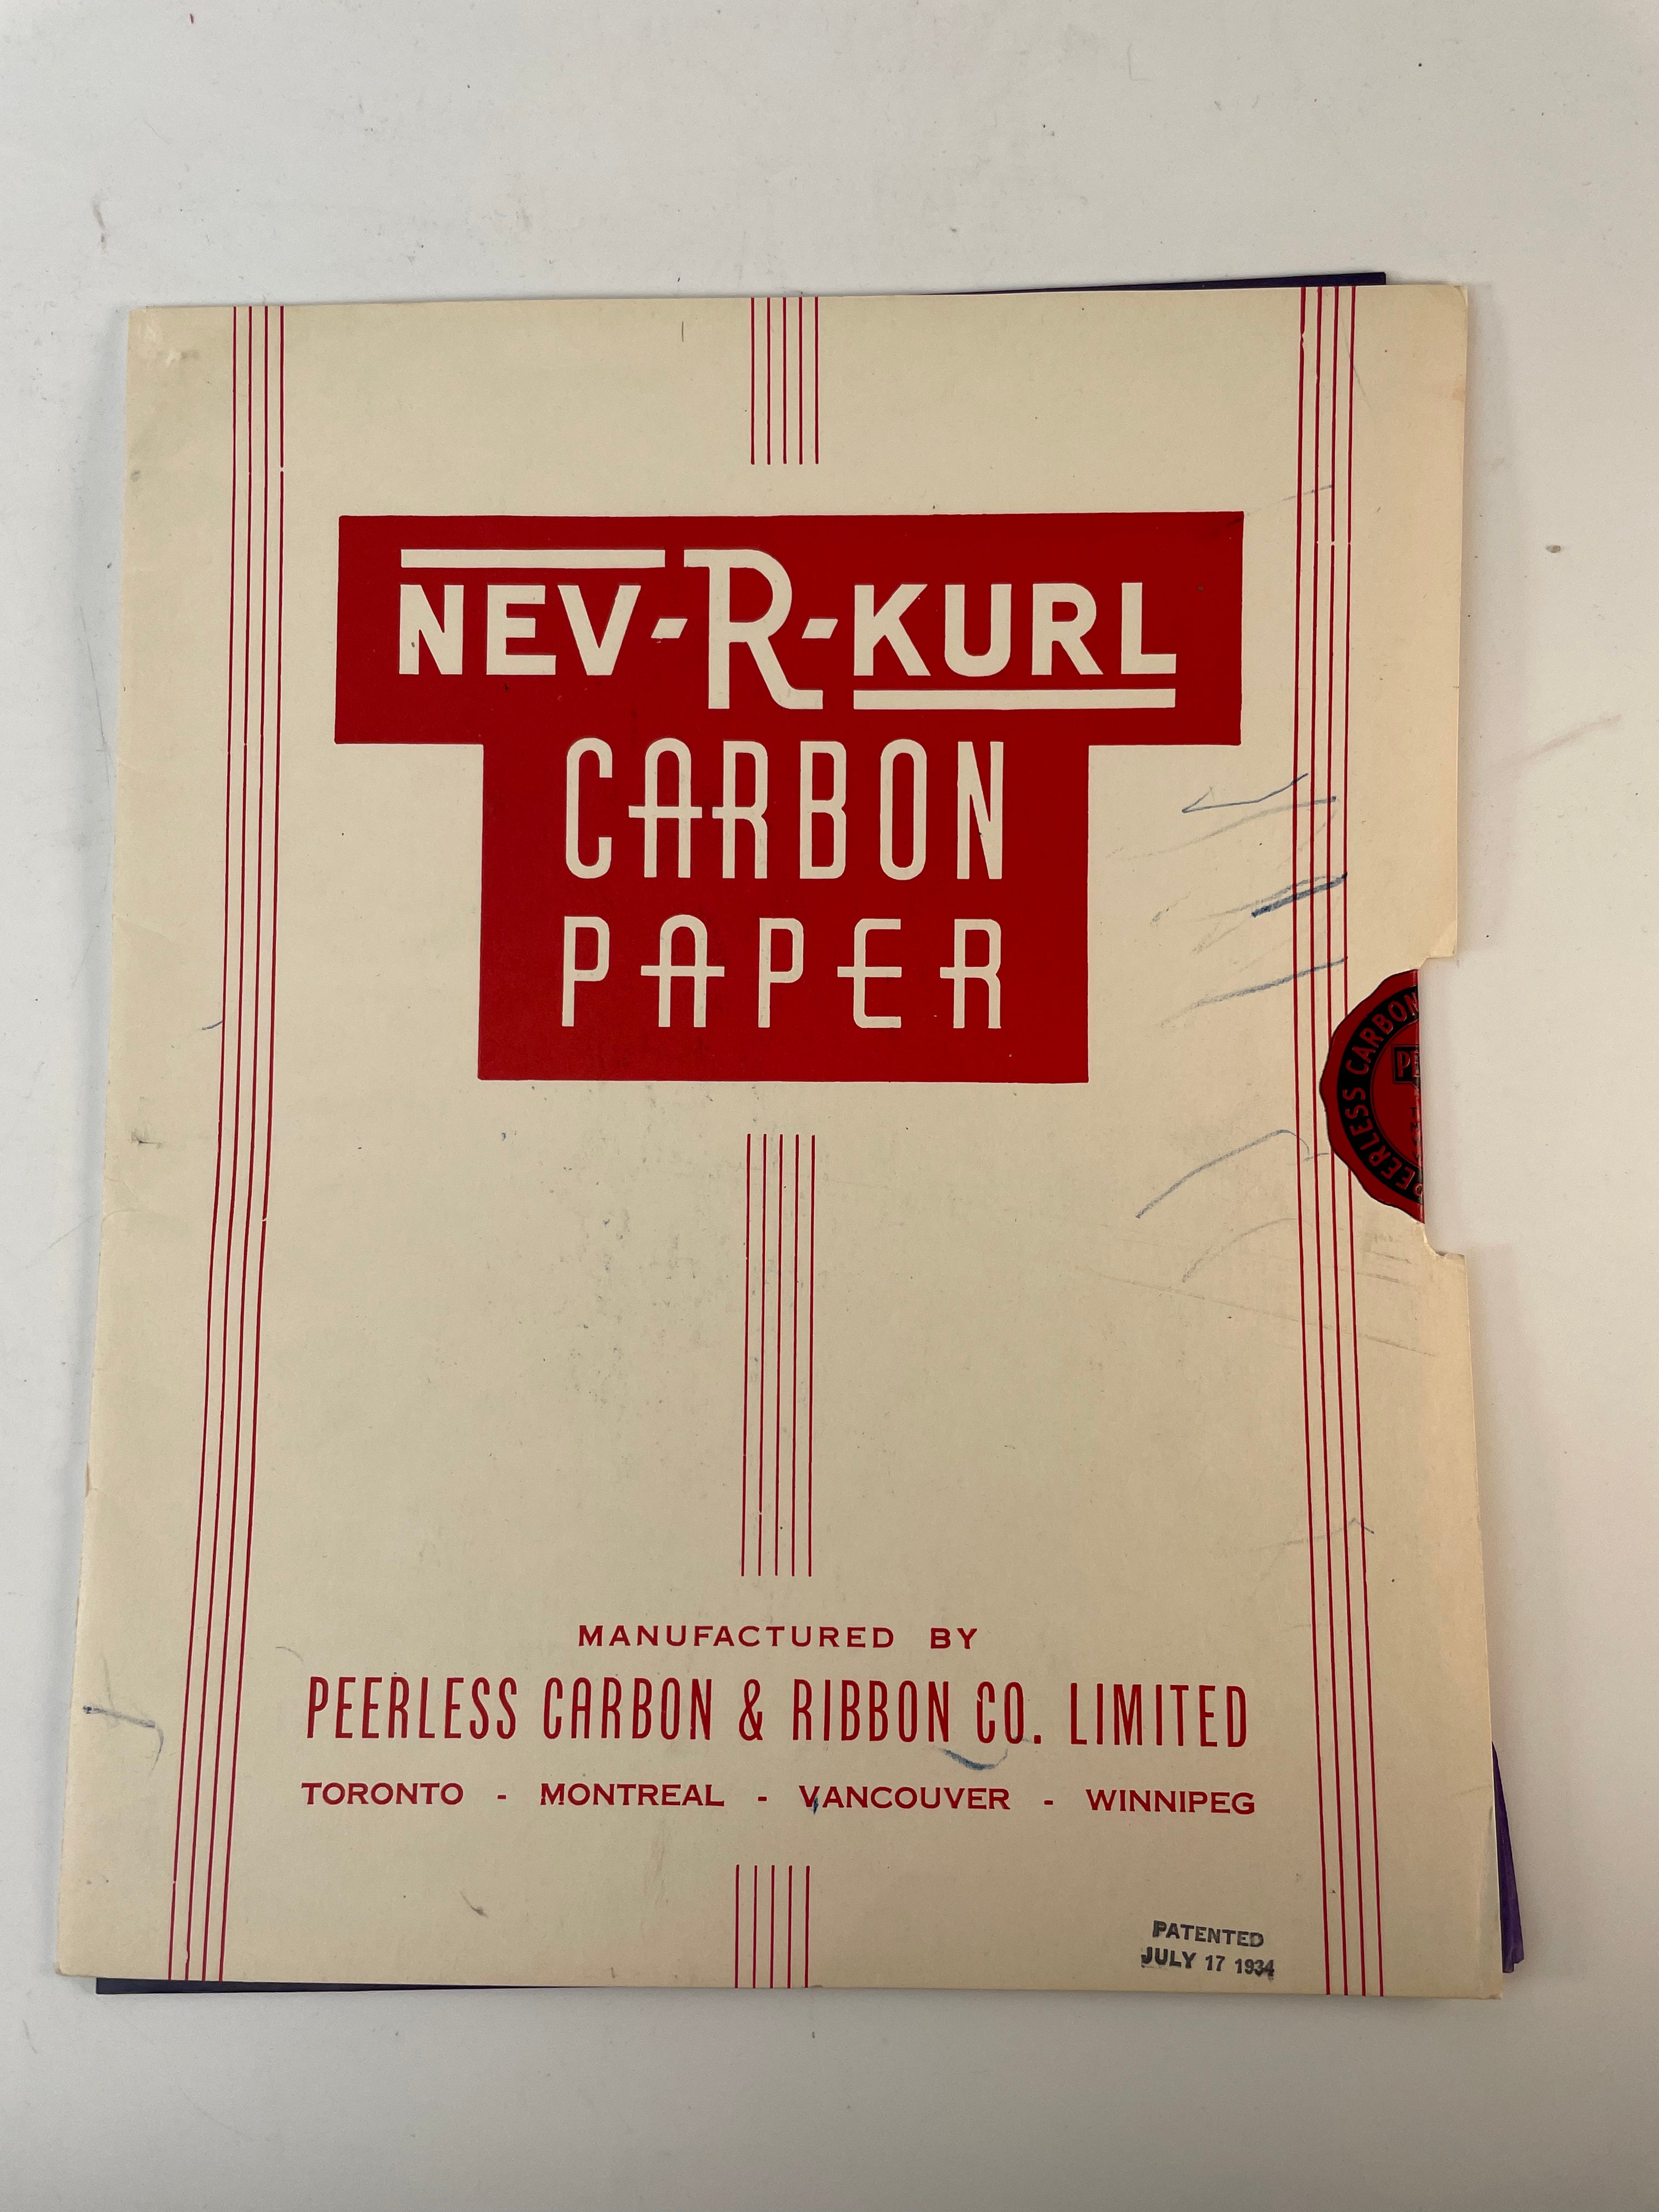 NEV-R-KURL Carbon Paper, manufactured by Peerless Carbon & Ribbon Co. Limited